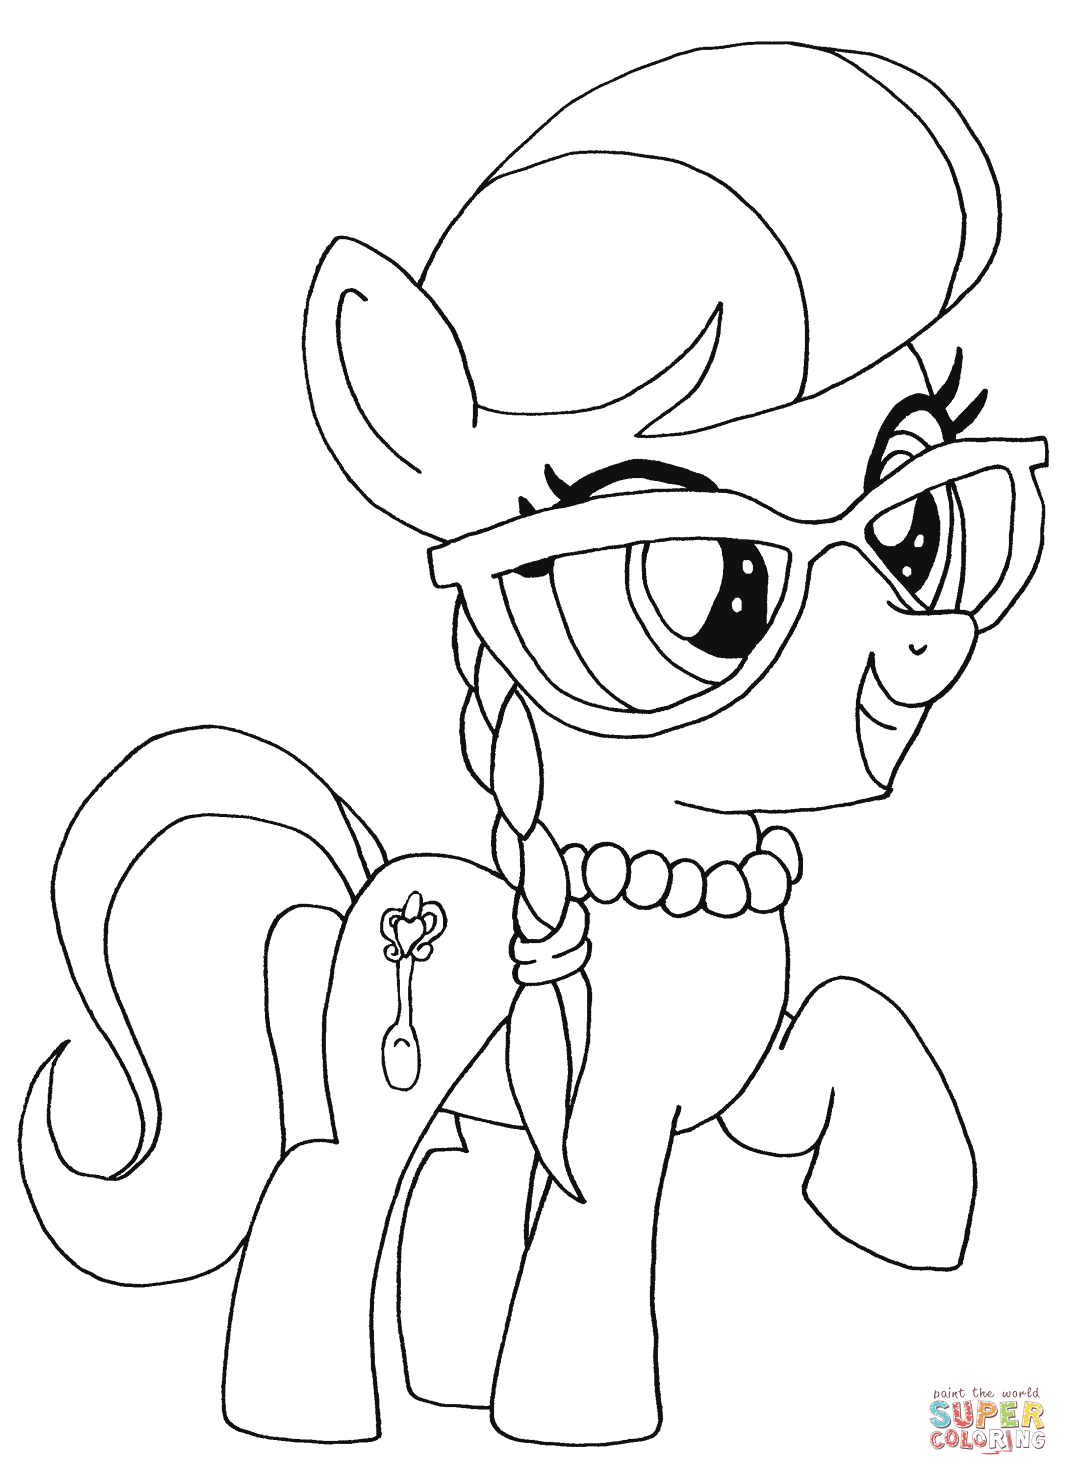 silverspoon coloring page